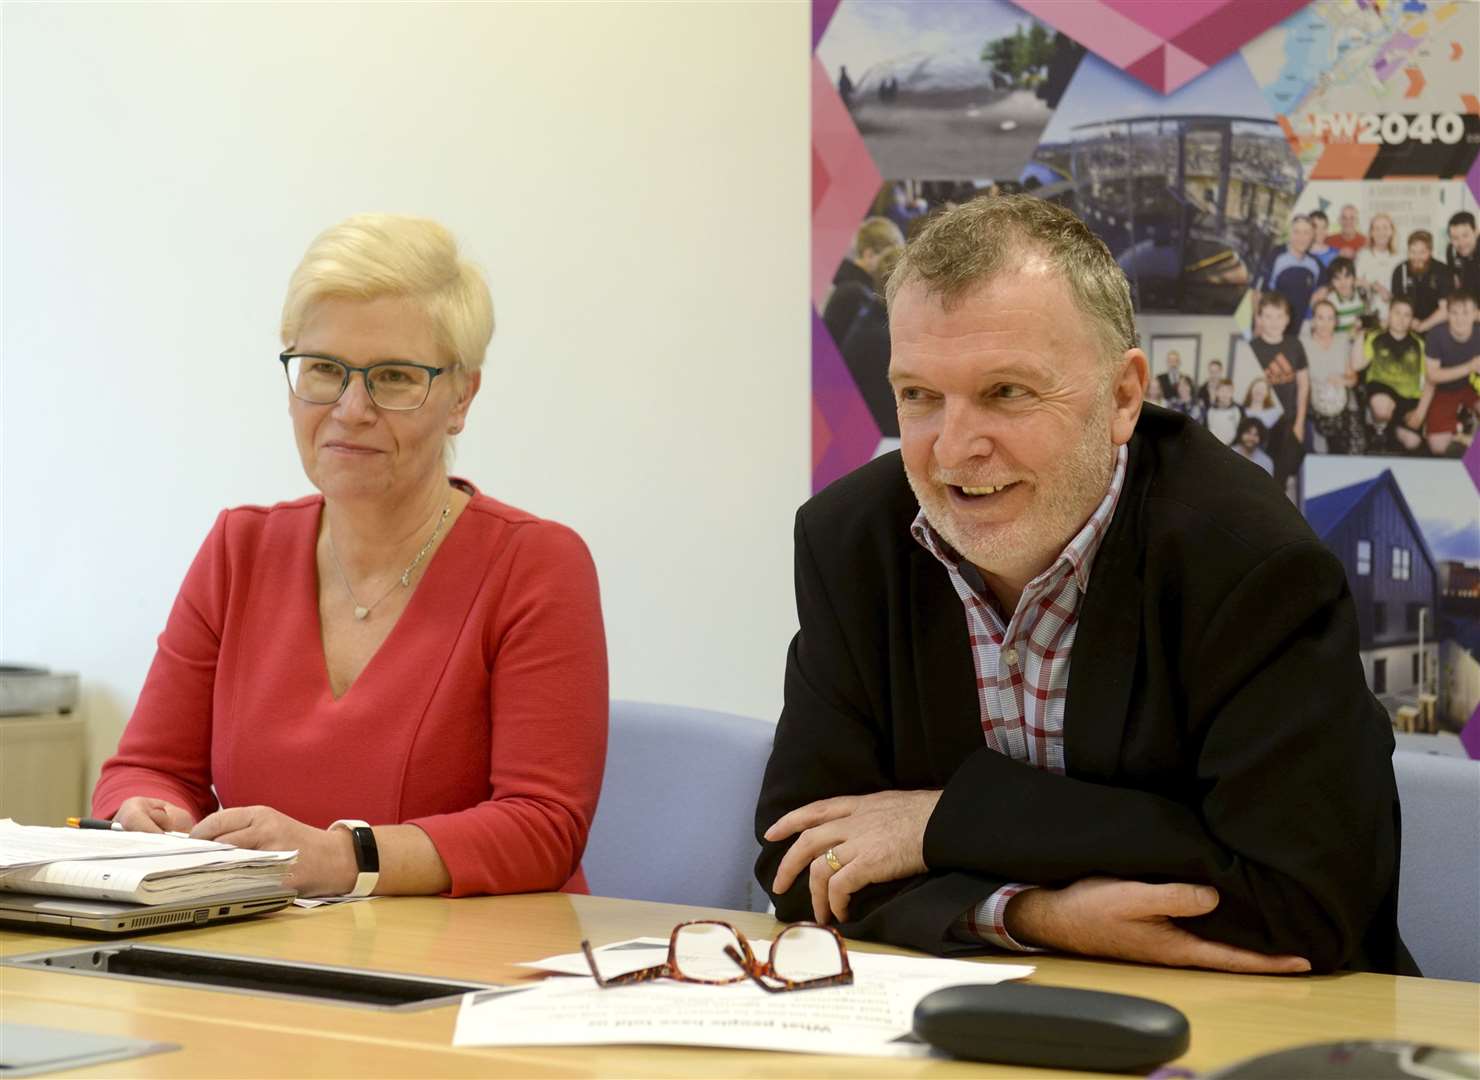 Executive chief officer of resources and finance Liz Denovan and deputy council leader, Cllr Alasdair Christie.